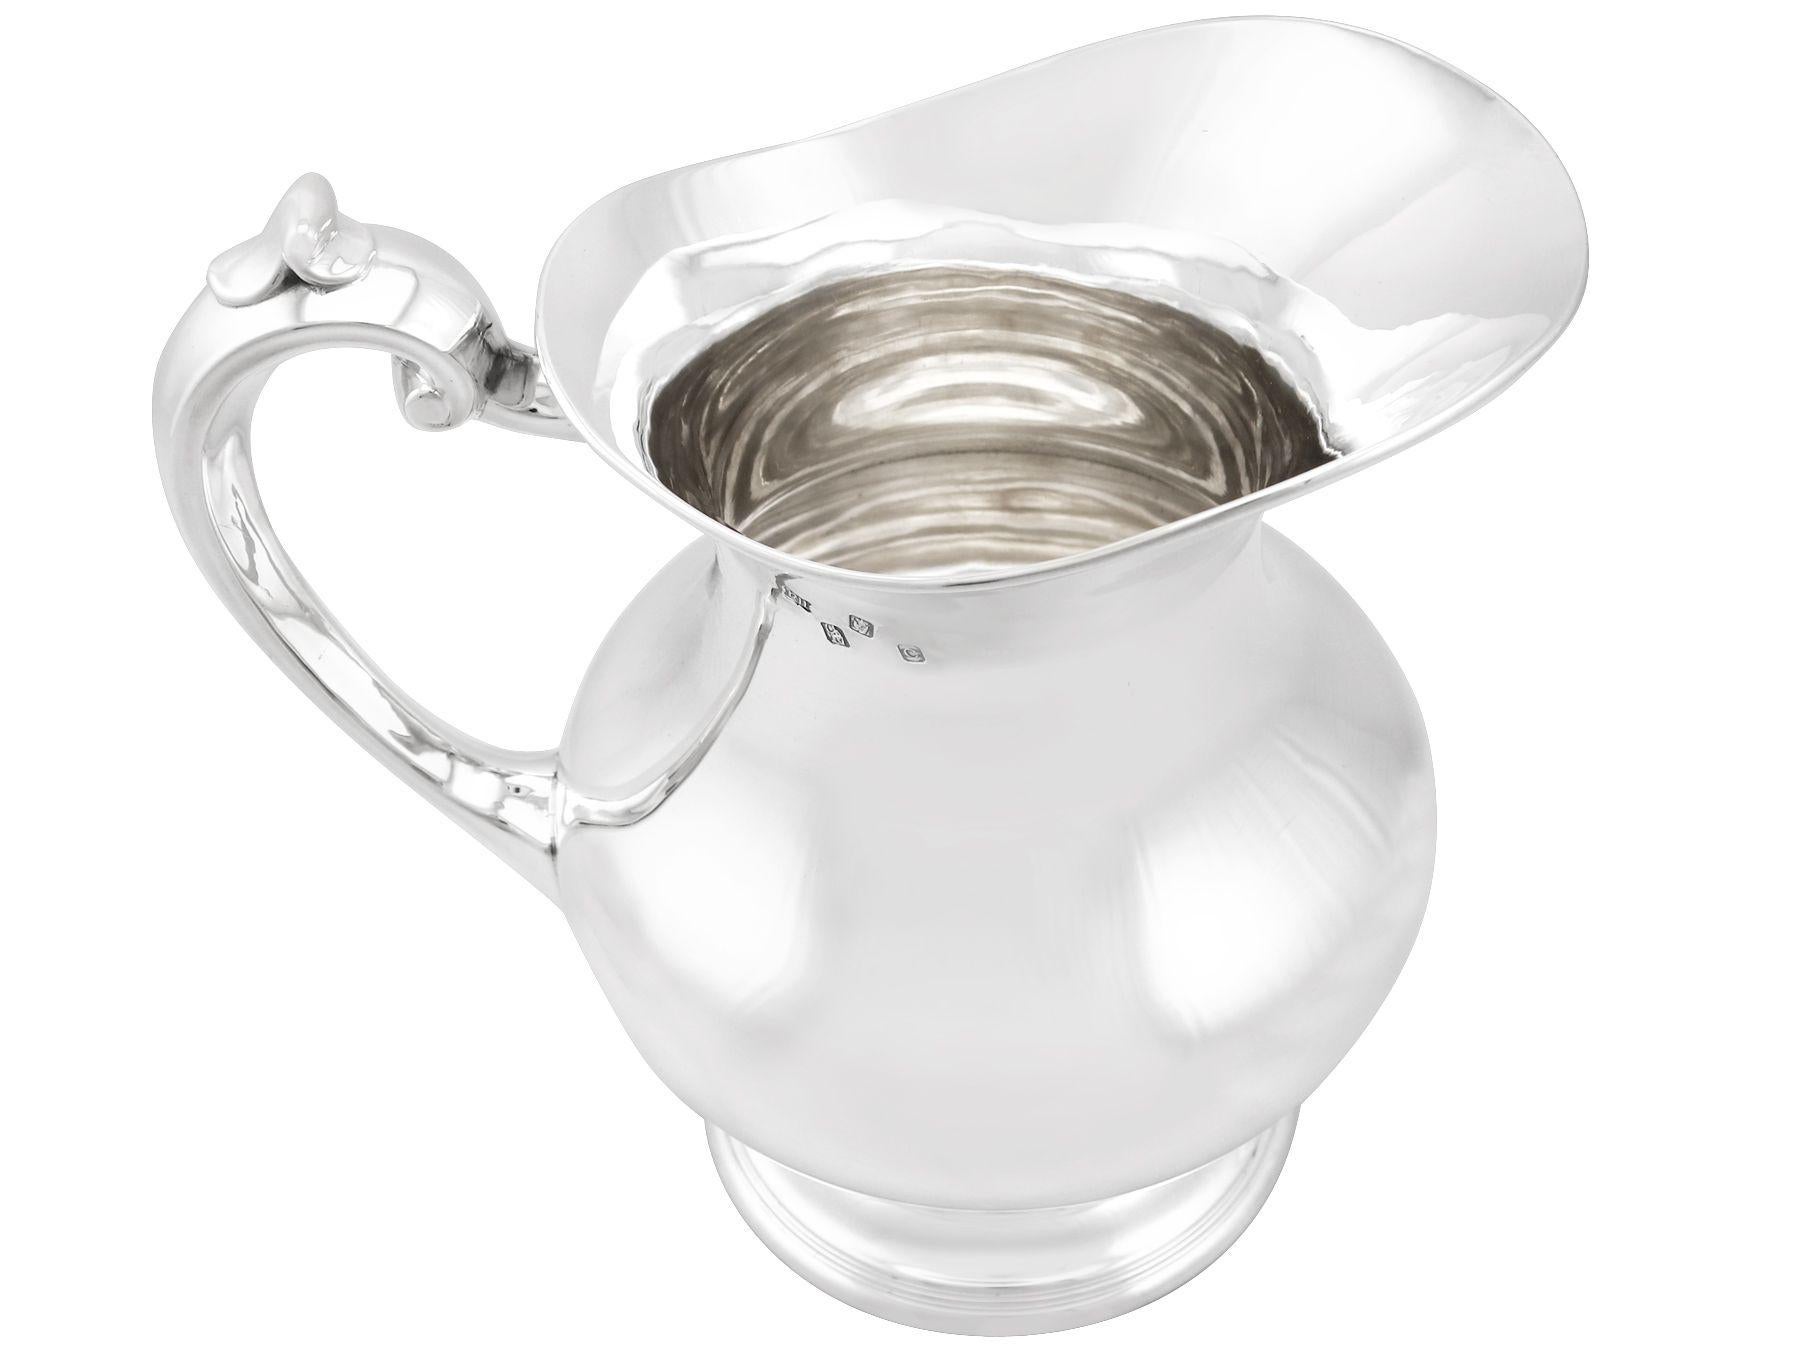 An exceptional, fine and impressive vintage Elizabeth II Irish sterling silver water jug; part of our vintage dining silverware collection.

His exceptional vintage Irish silver water jug, in sterling standard, has a plain baluster form onto a